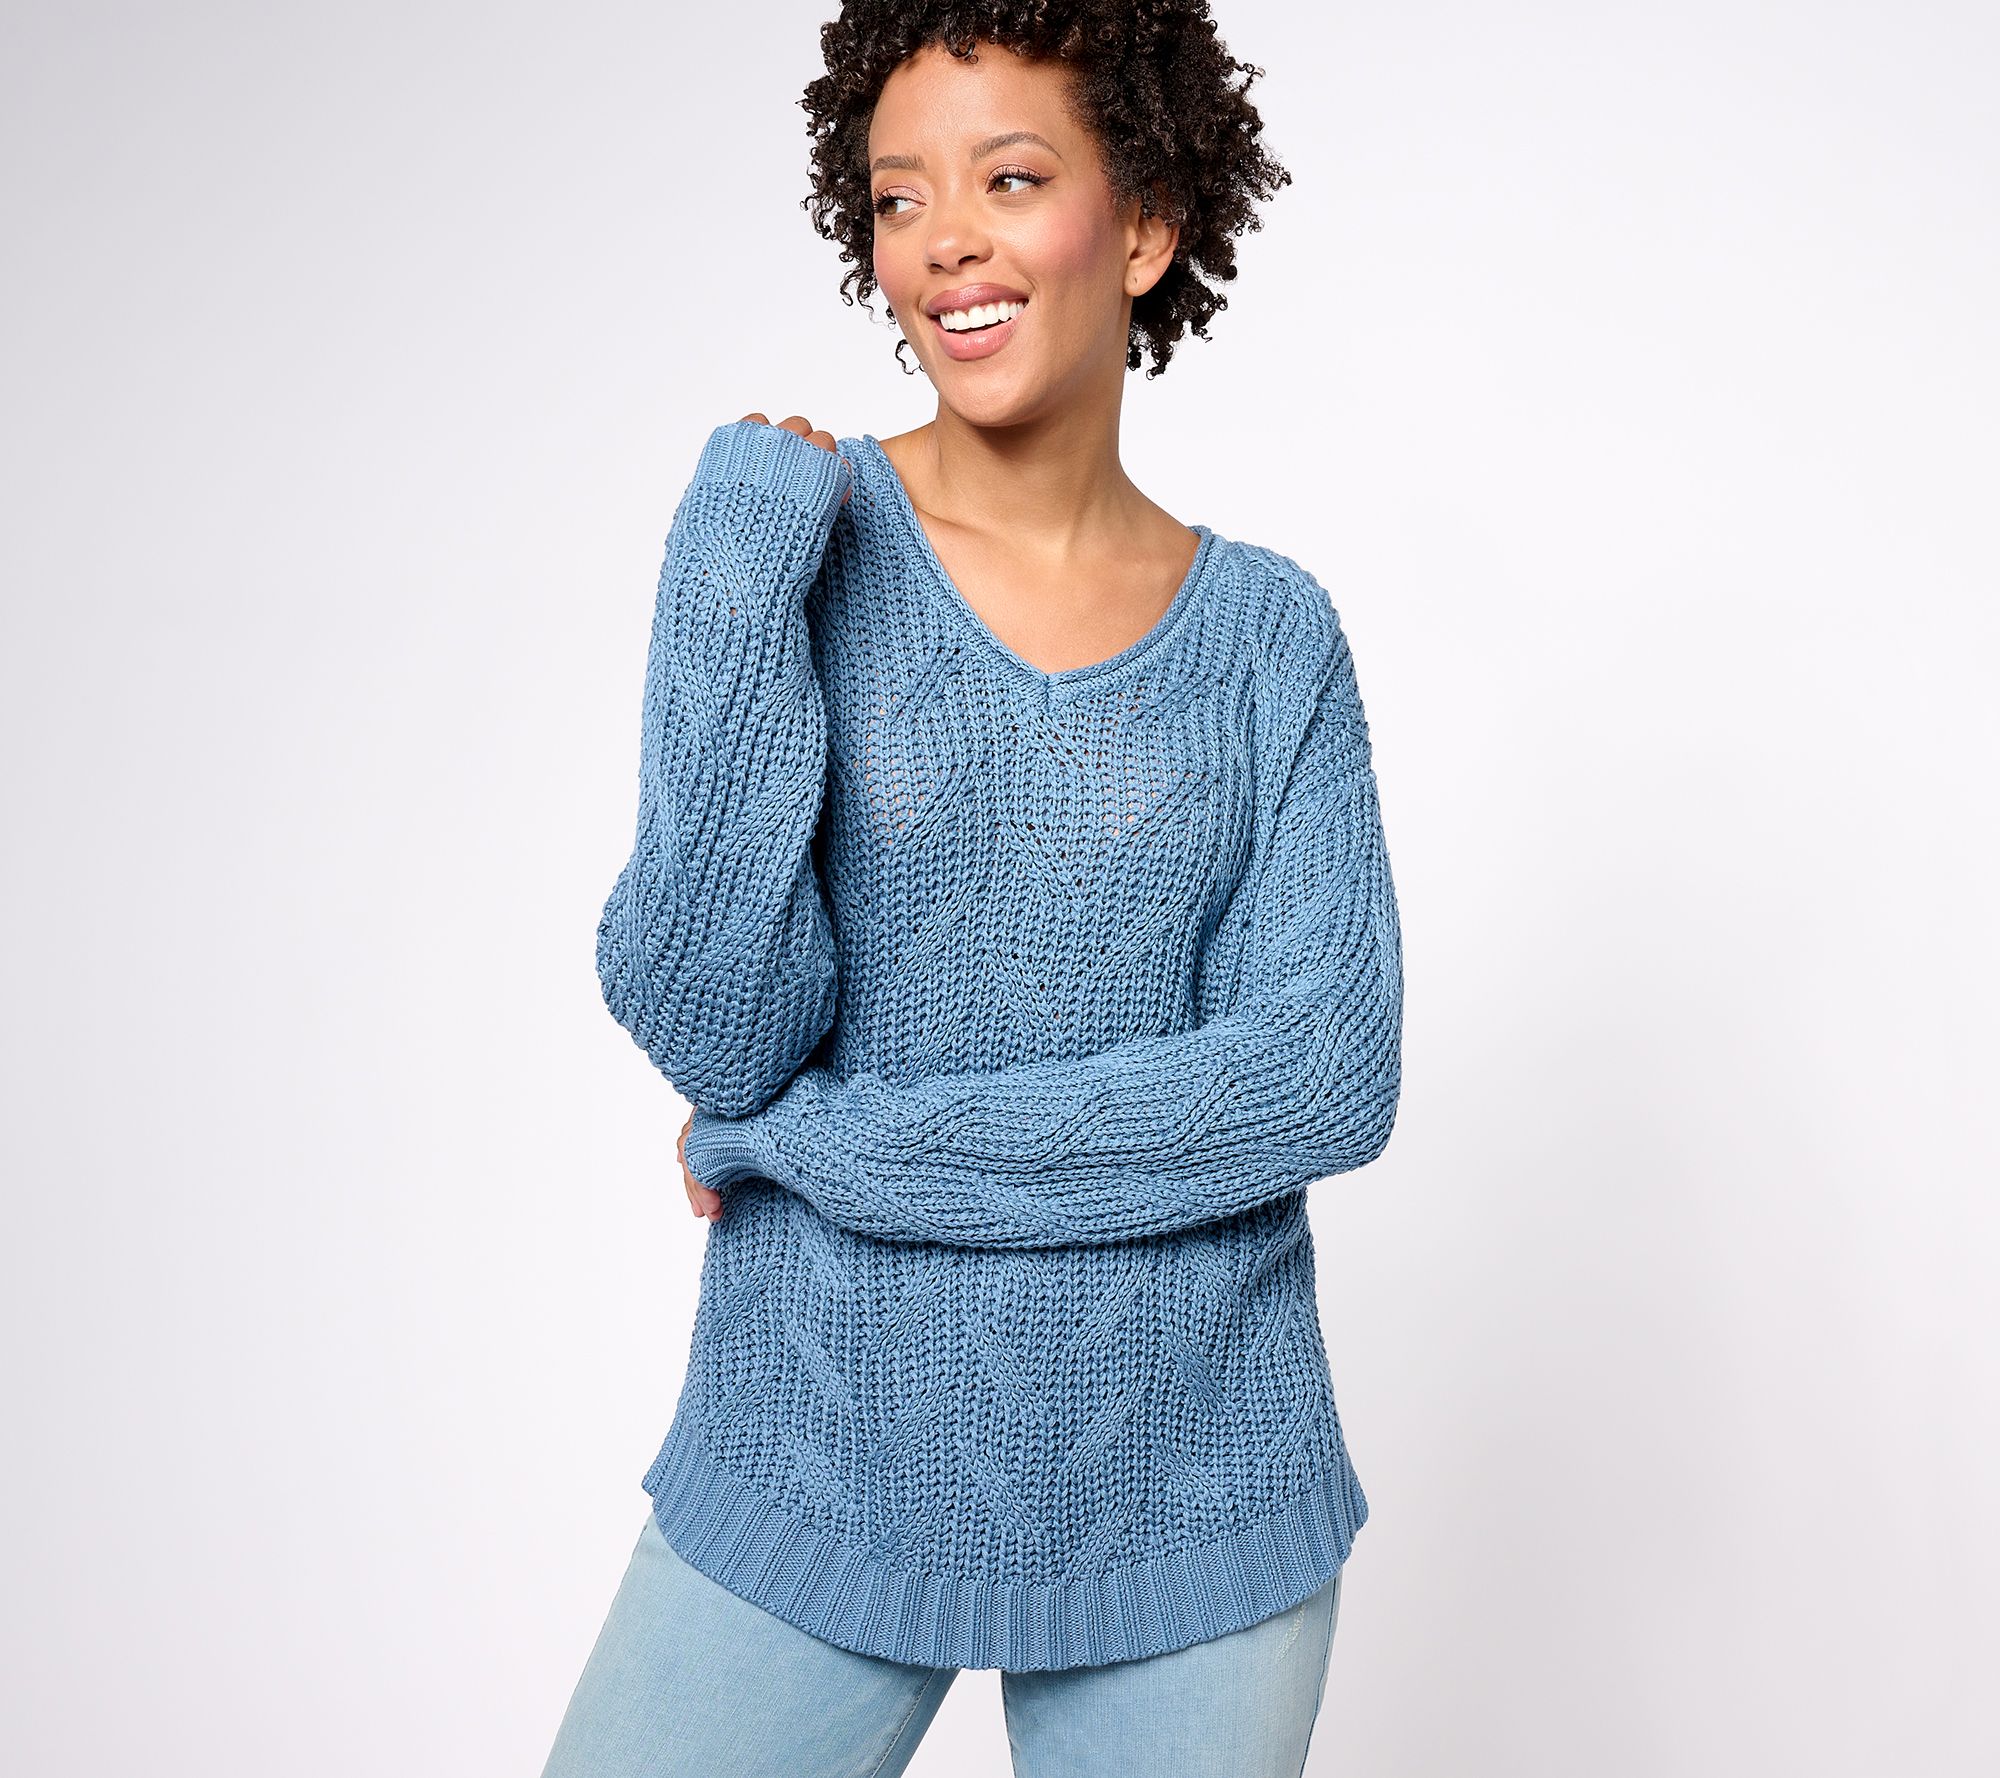 Save Up To 50% on Jumpers & Sweaters, Outlet